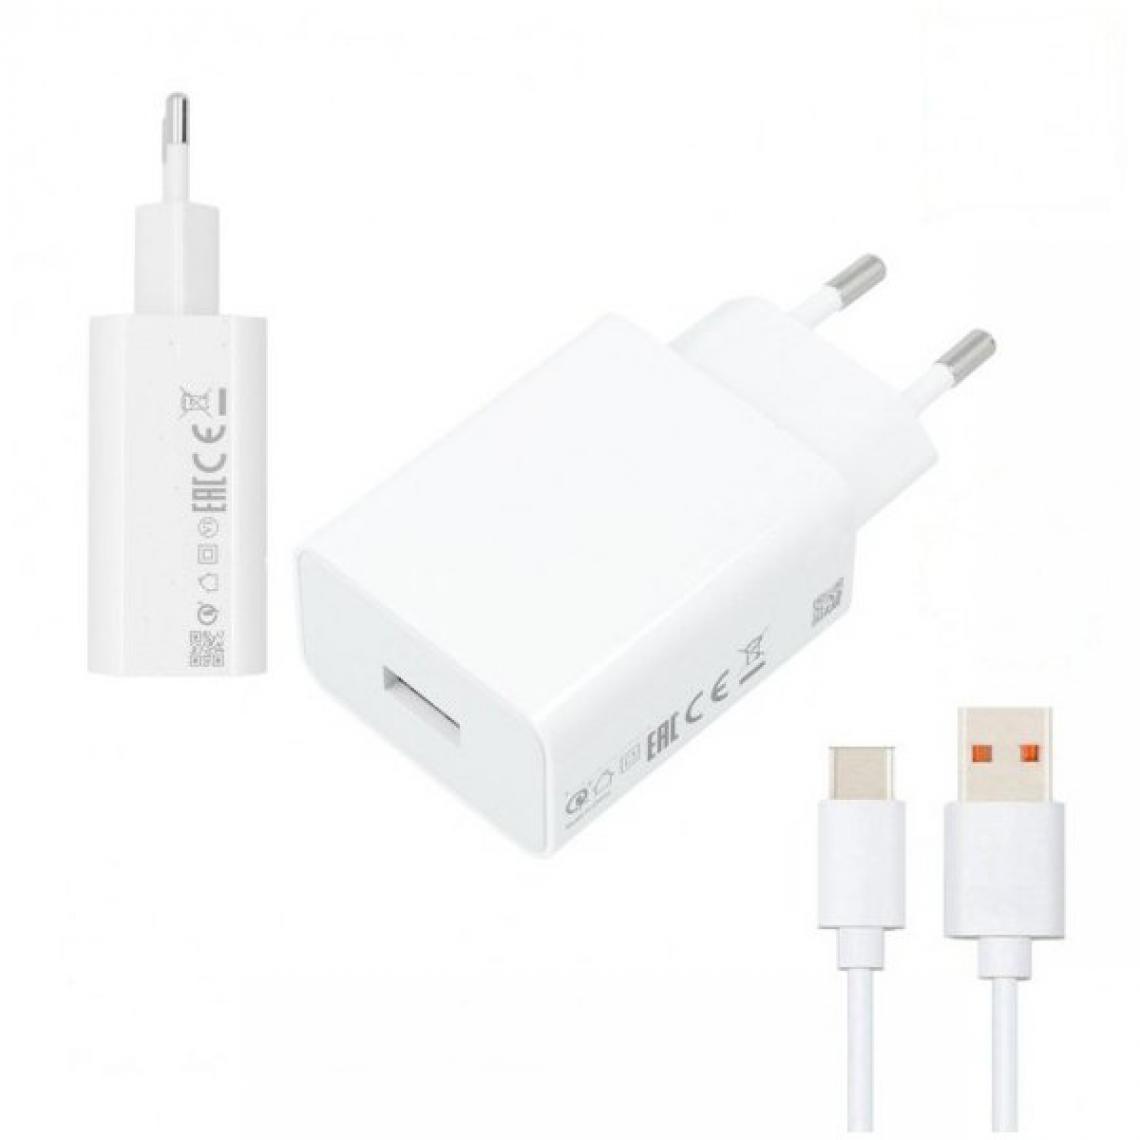 Phonecare - Kit Chargeur Turbo Fast Charge 33W 3A USB + Câble de Charge Turbo Fast Charge 5A Type-C 1M - Xiaomi Note 10 Pro Max - Autres accessoires smartphone